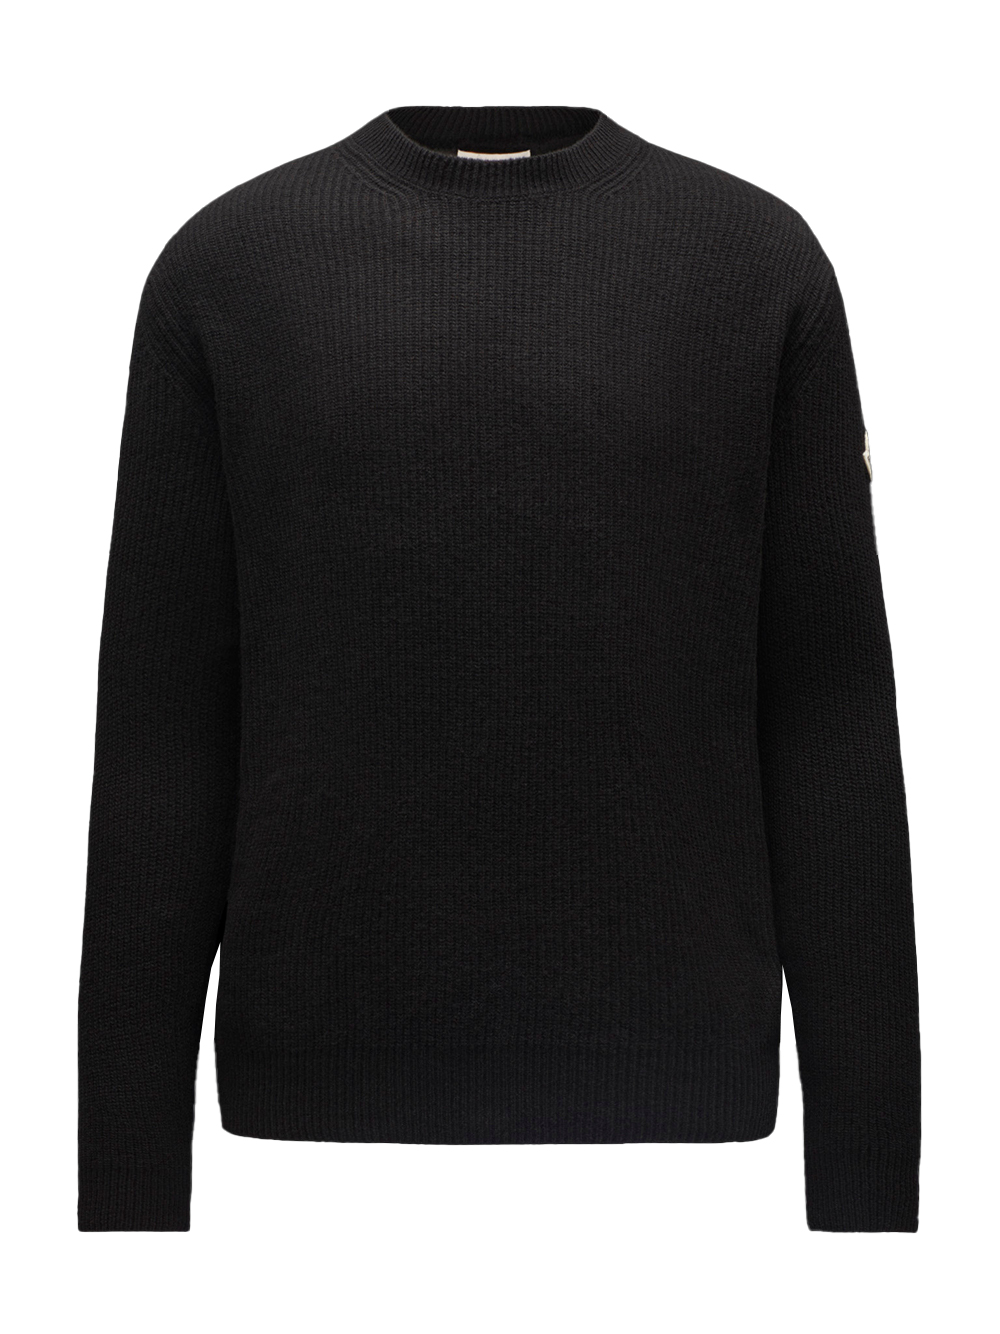 Moncler Wool and Cashmere Knit Sweater Black Men's - SS22 - US